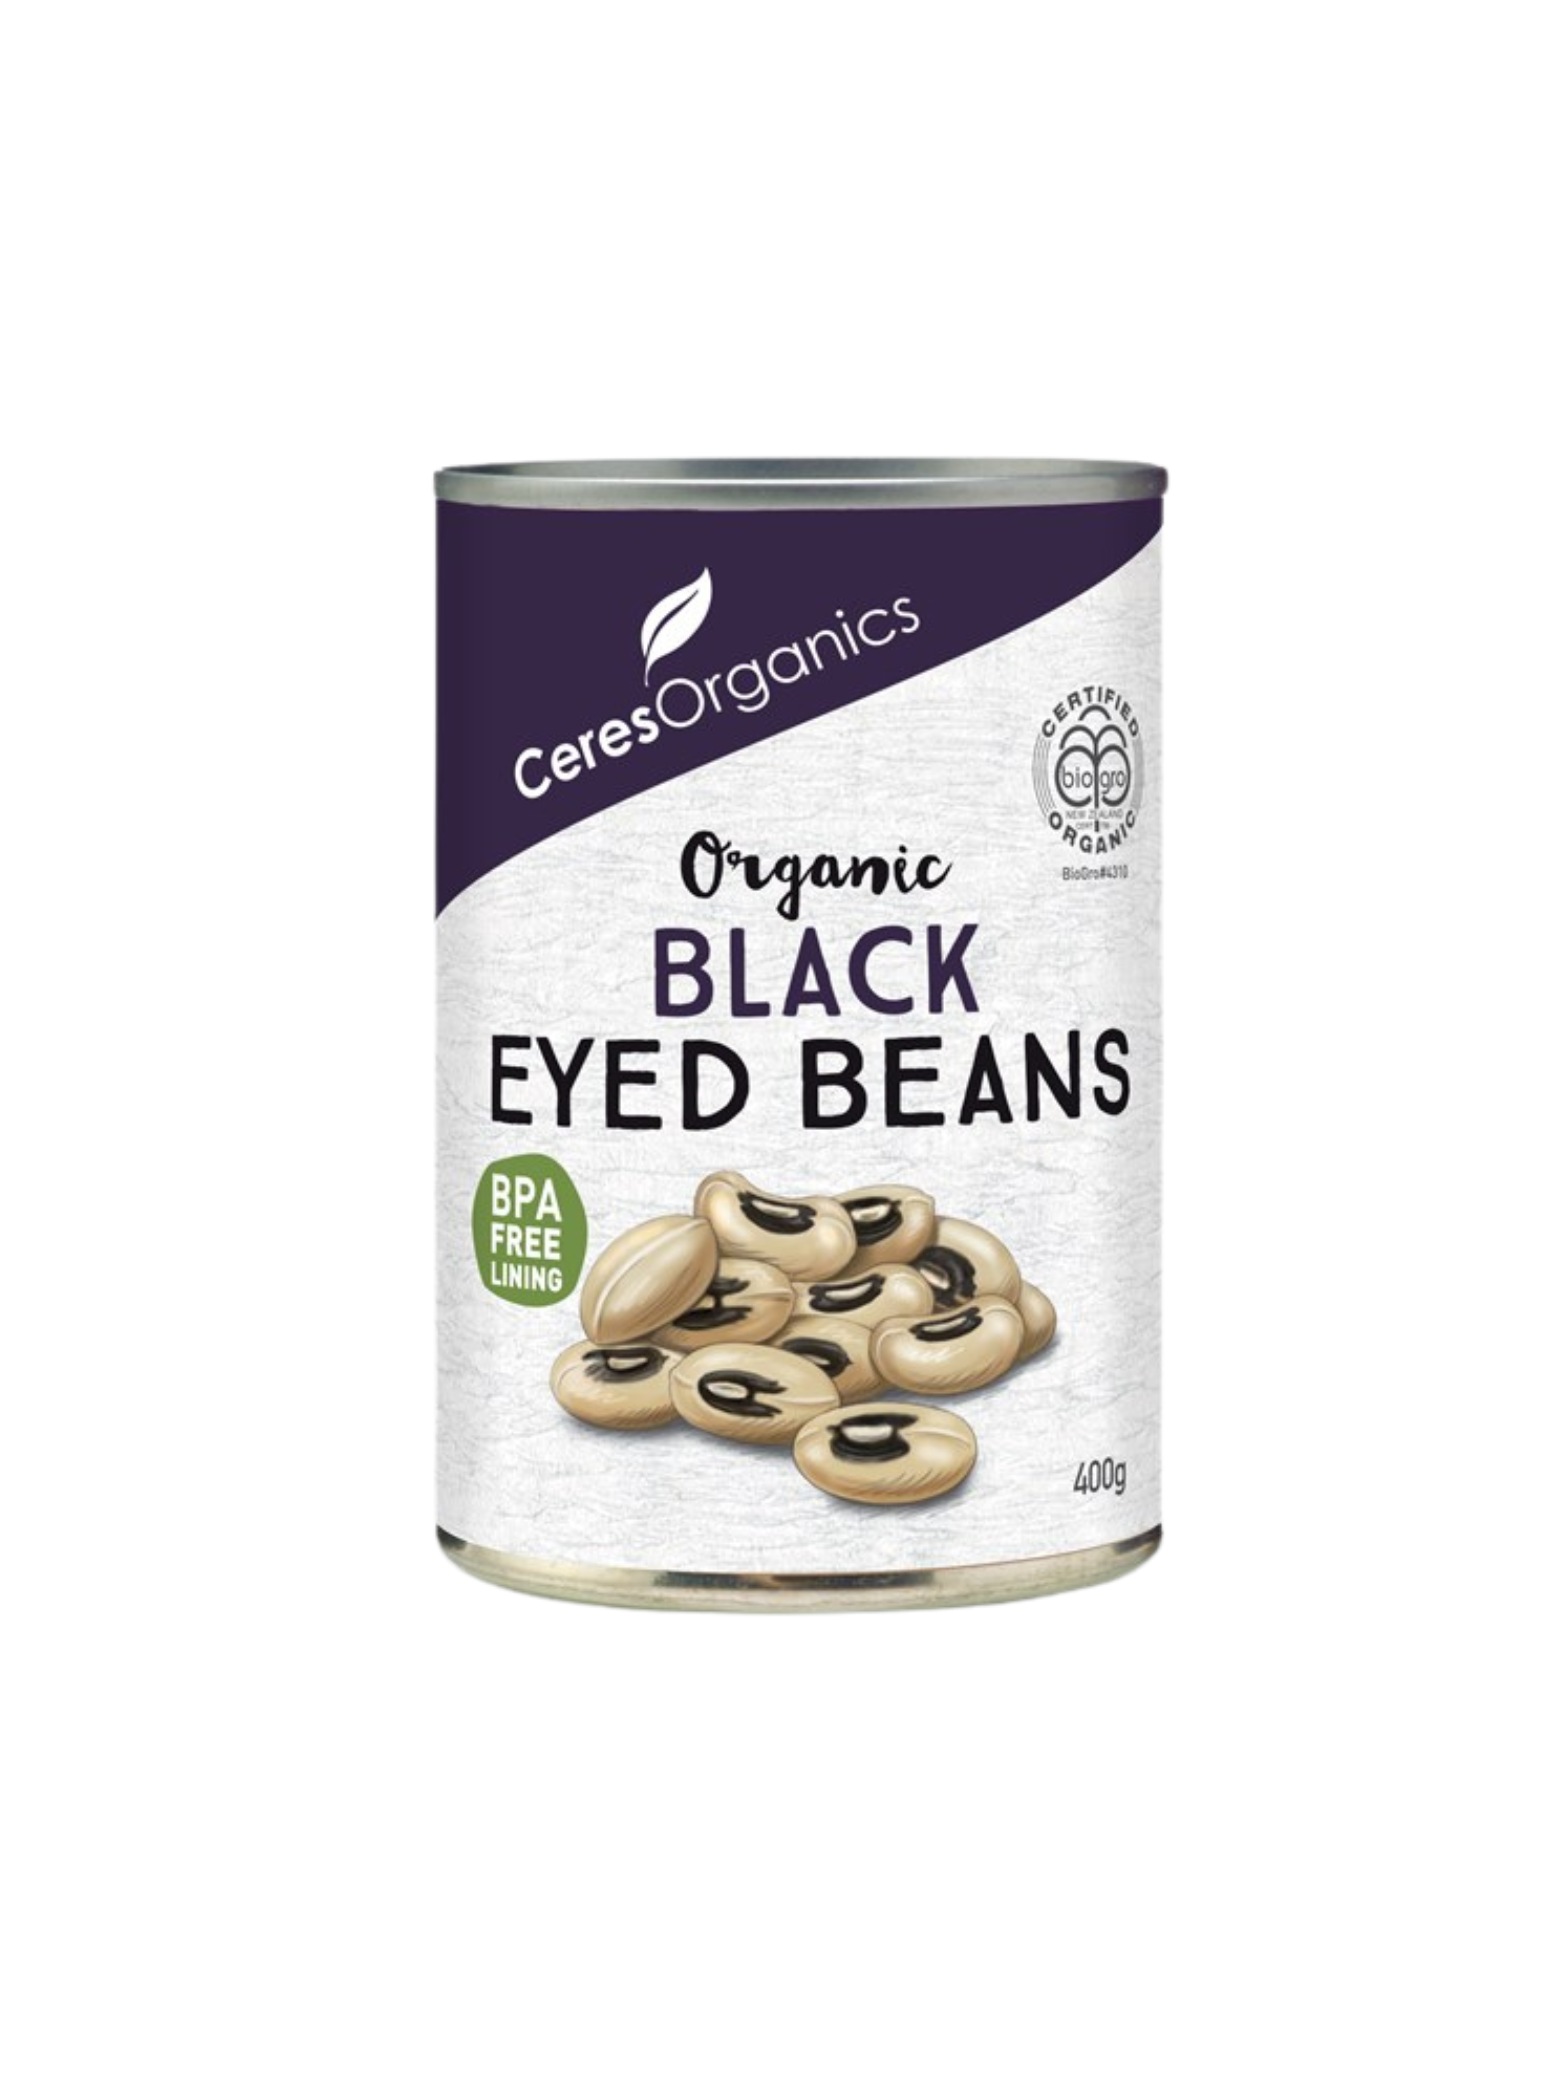 Organic Canned Black-Eyed Beans